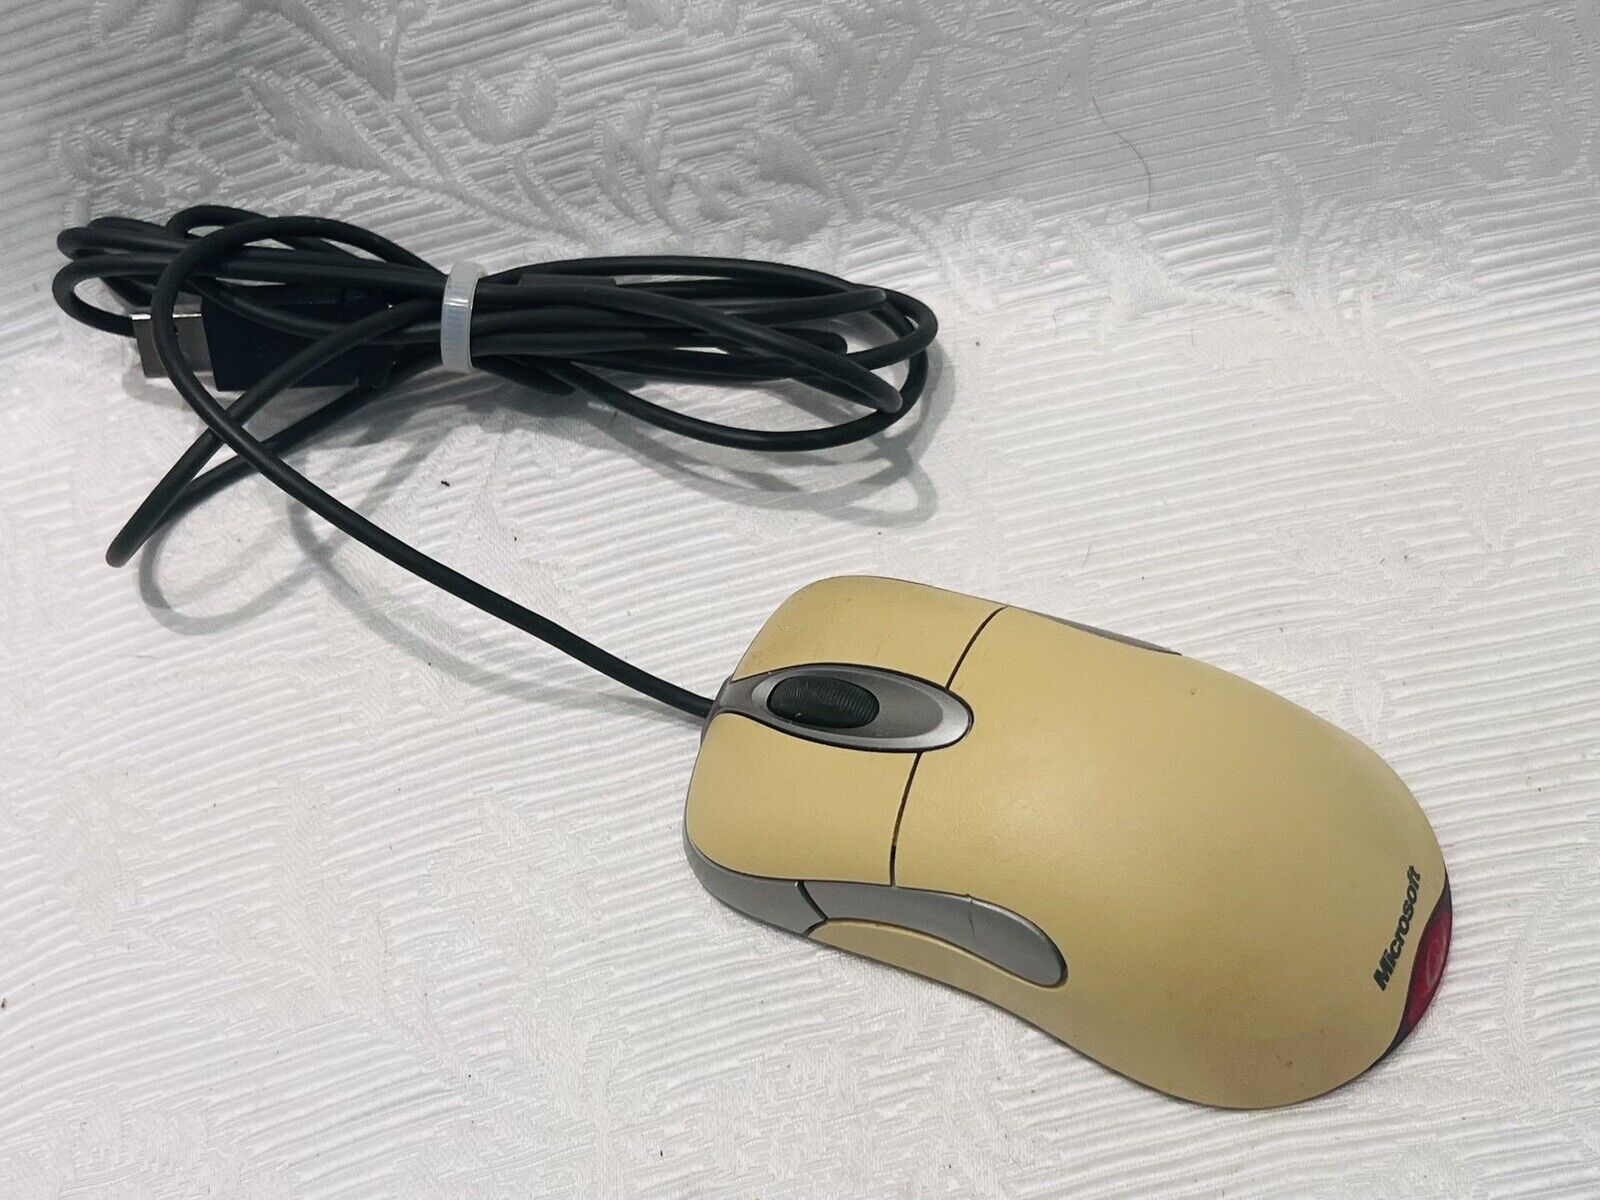 Vintage Microsoft intellimouse Optical USB Wheel Mouse 1.1/1.1a Off White